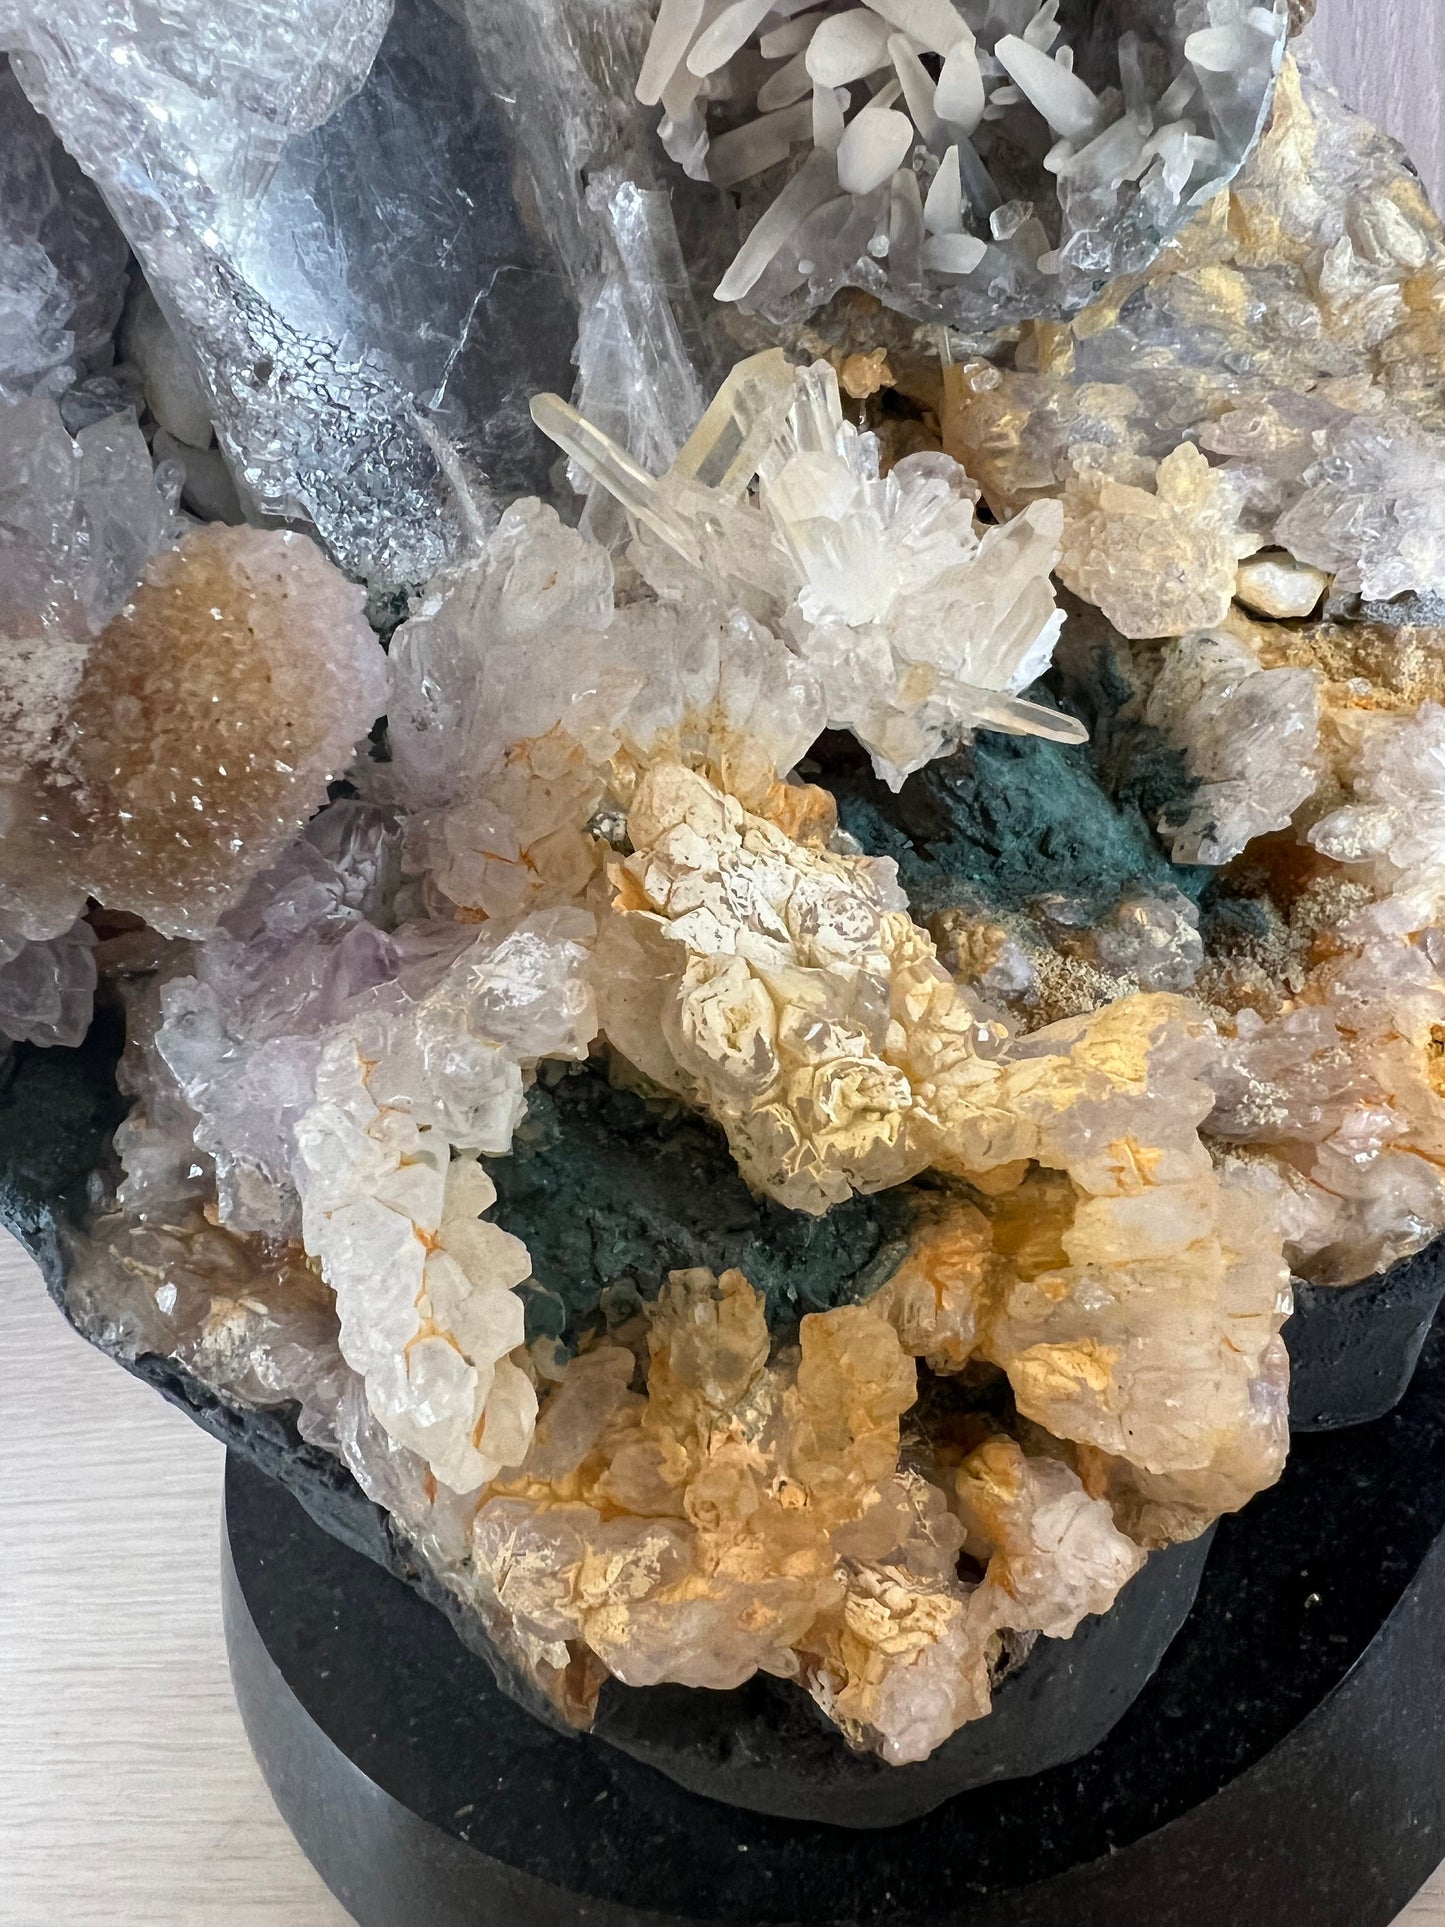 LARGE Tabletop Healing Crystals Clear, Amethyst, Aura, Smokey Quartz Crystal all Mixed LARGE of a Kind Hand Made Home Decor Gift Meditation